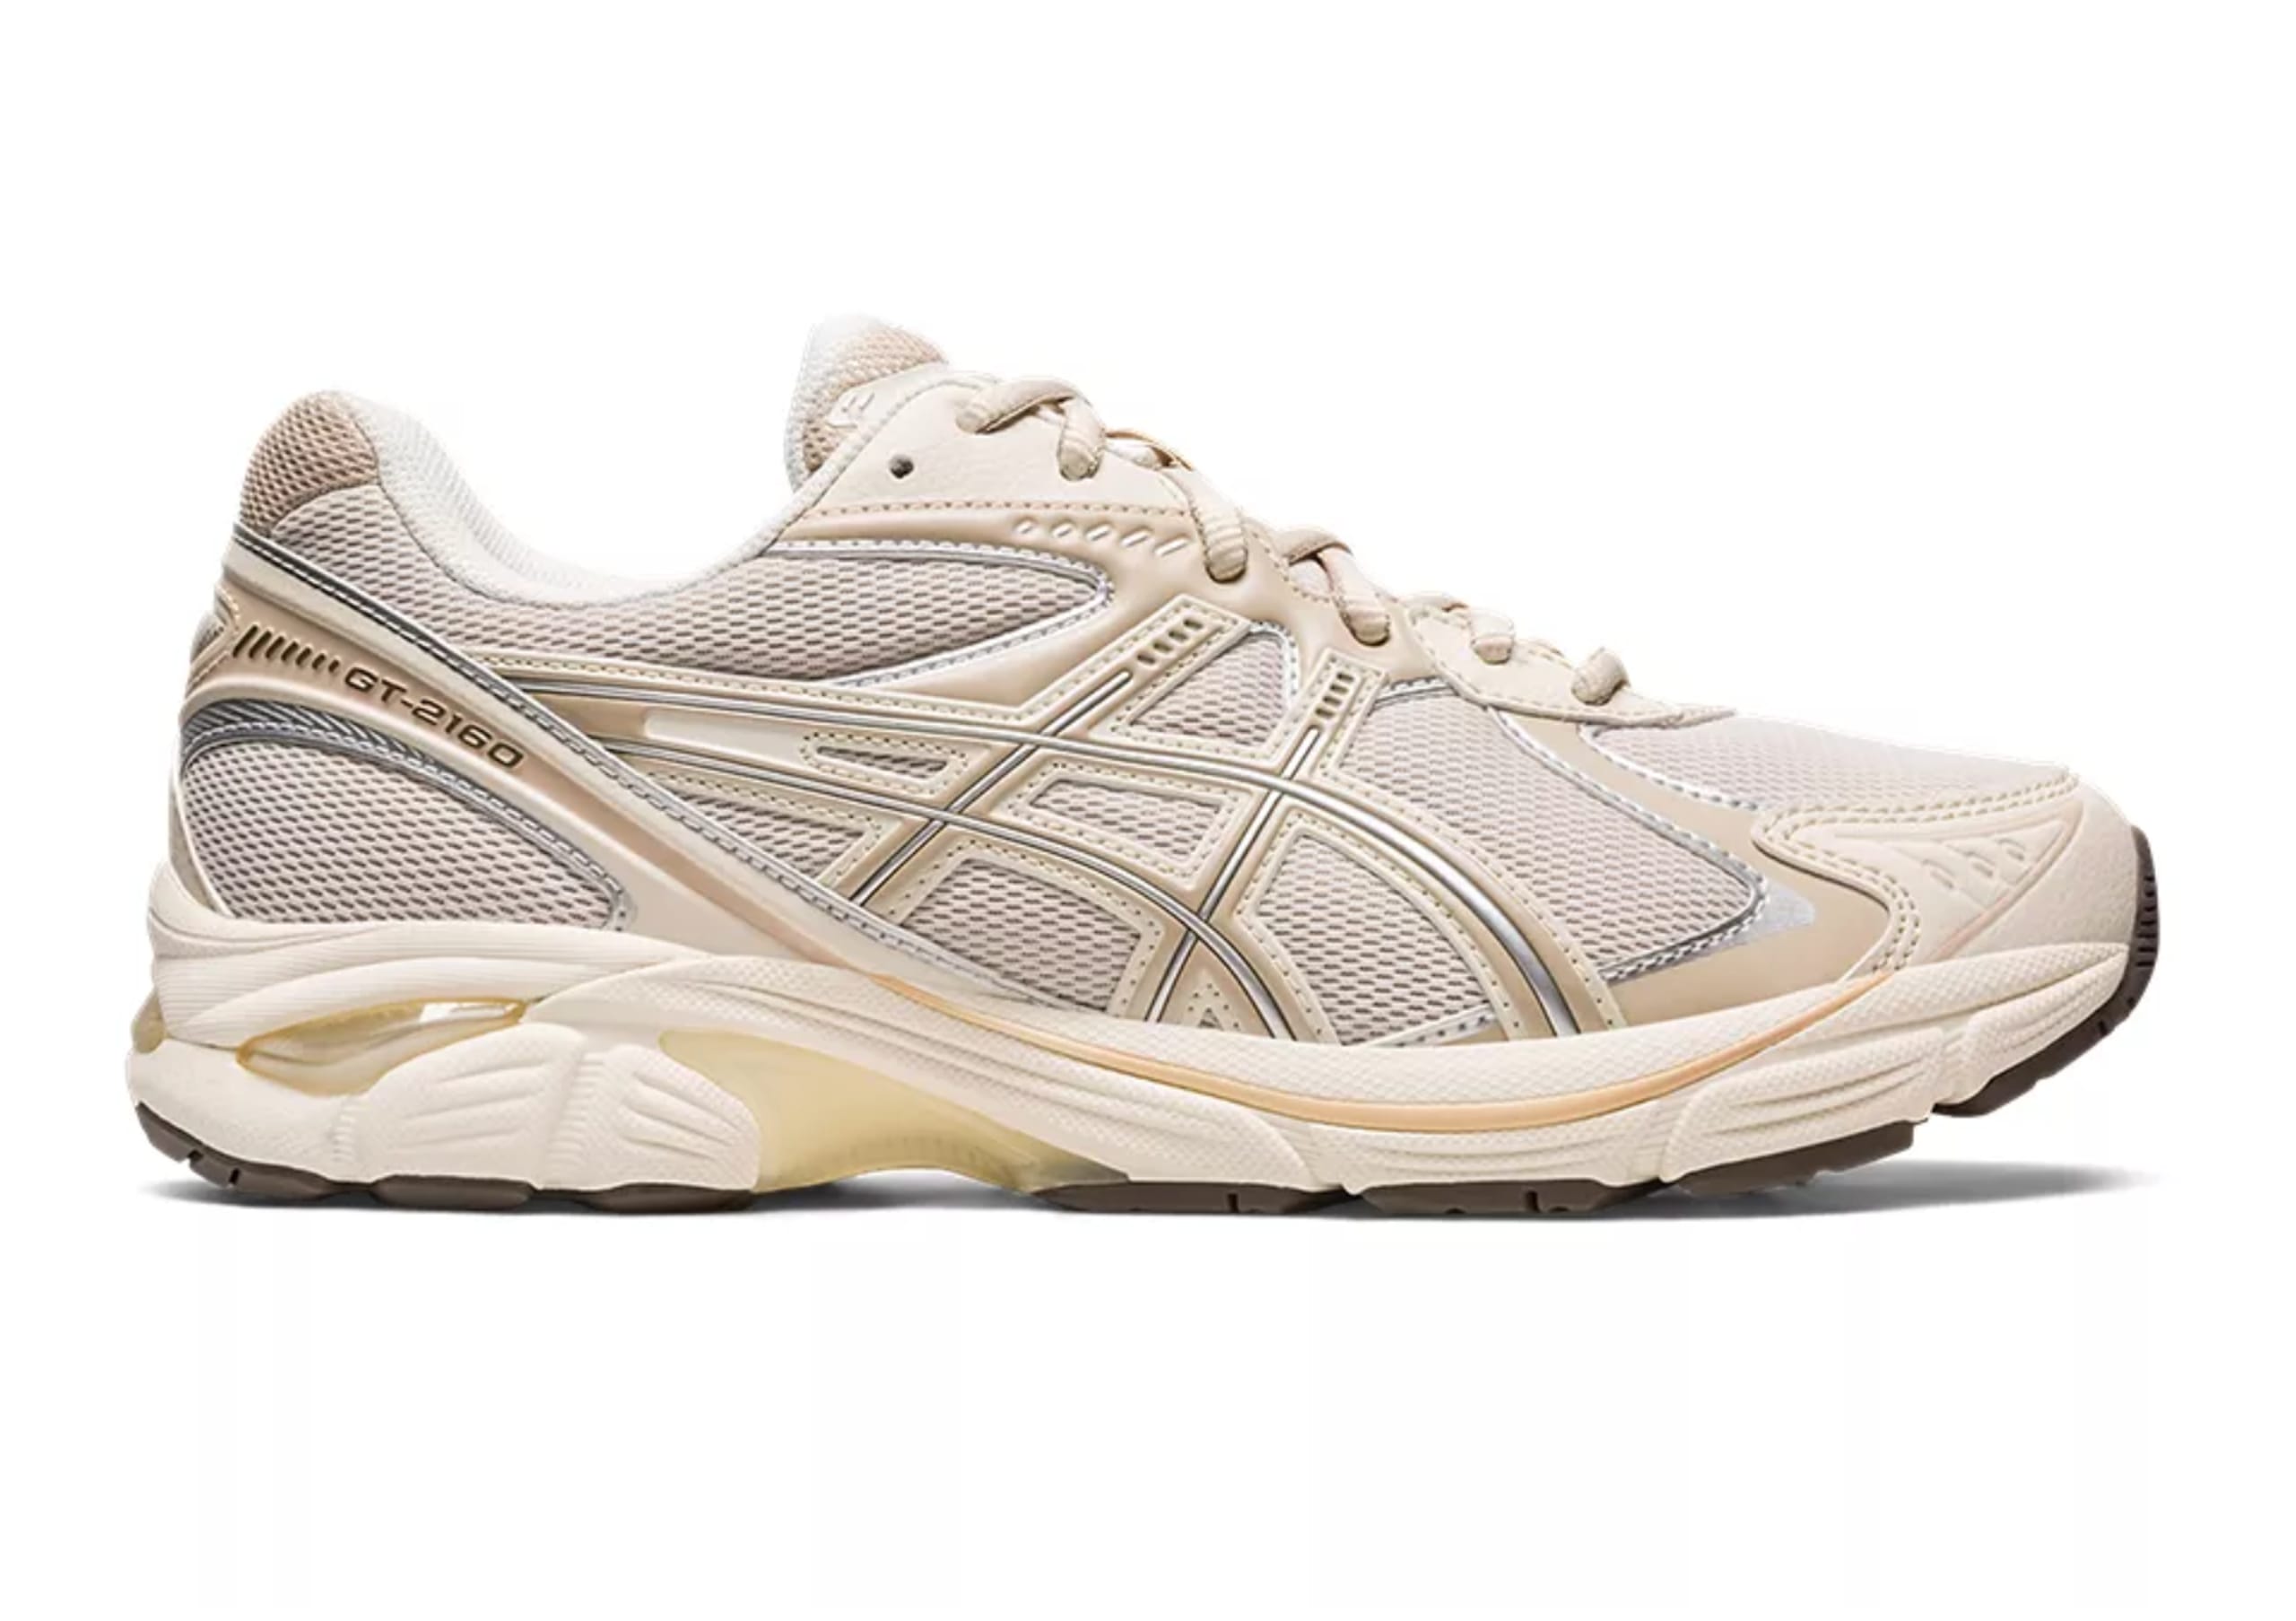 Asics - Sneakers - GT-2160 - Oatmeal/Simple Taupe